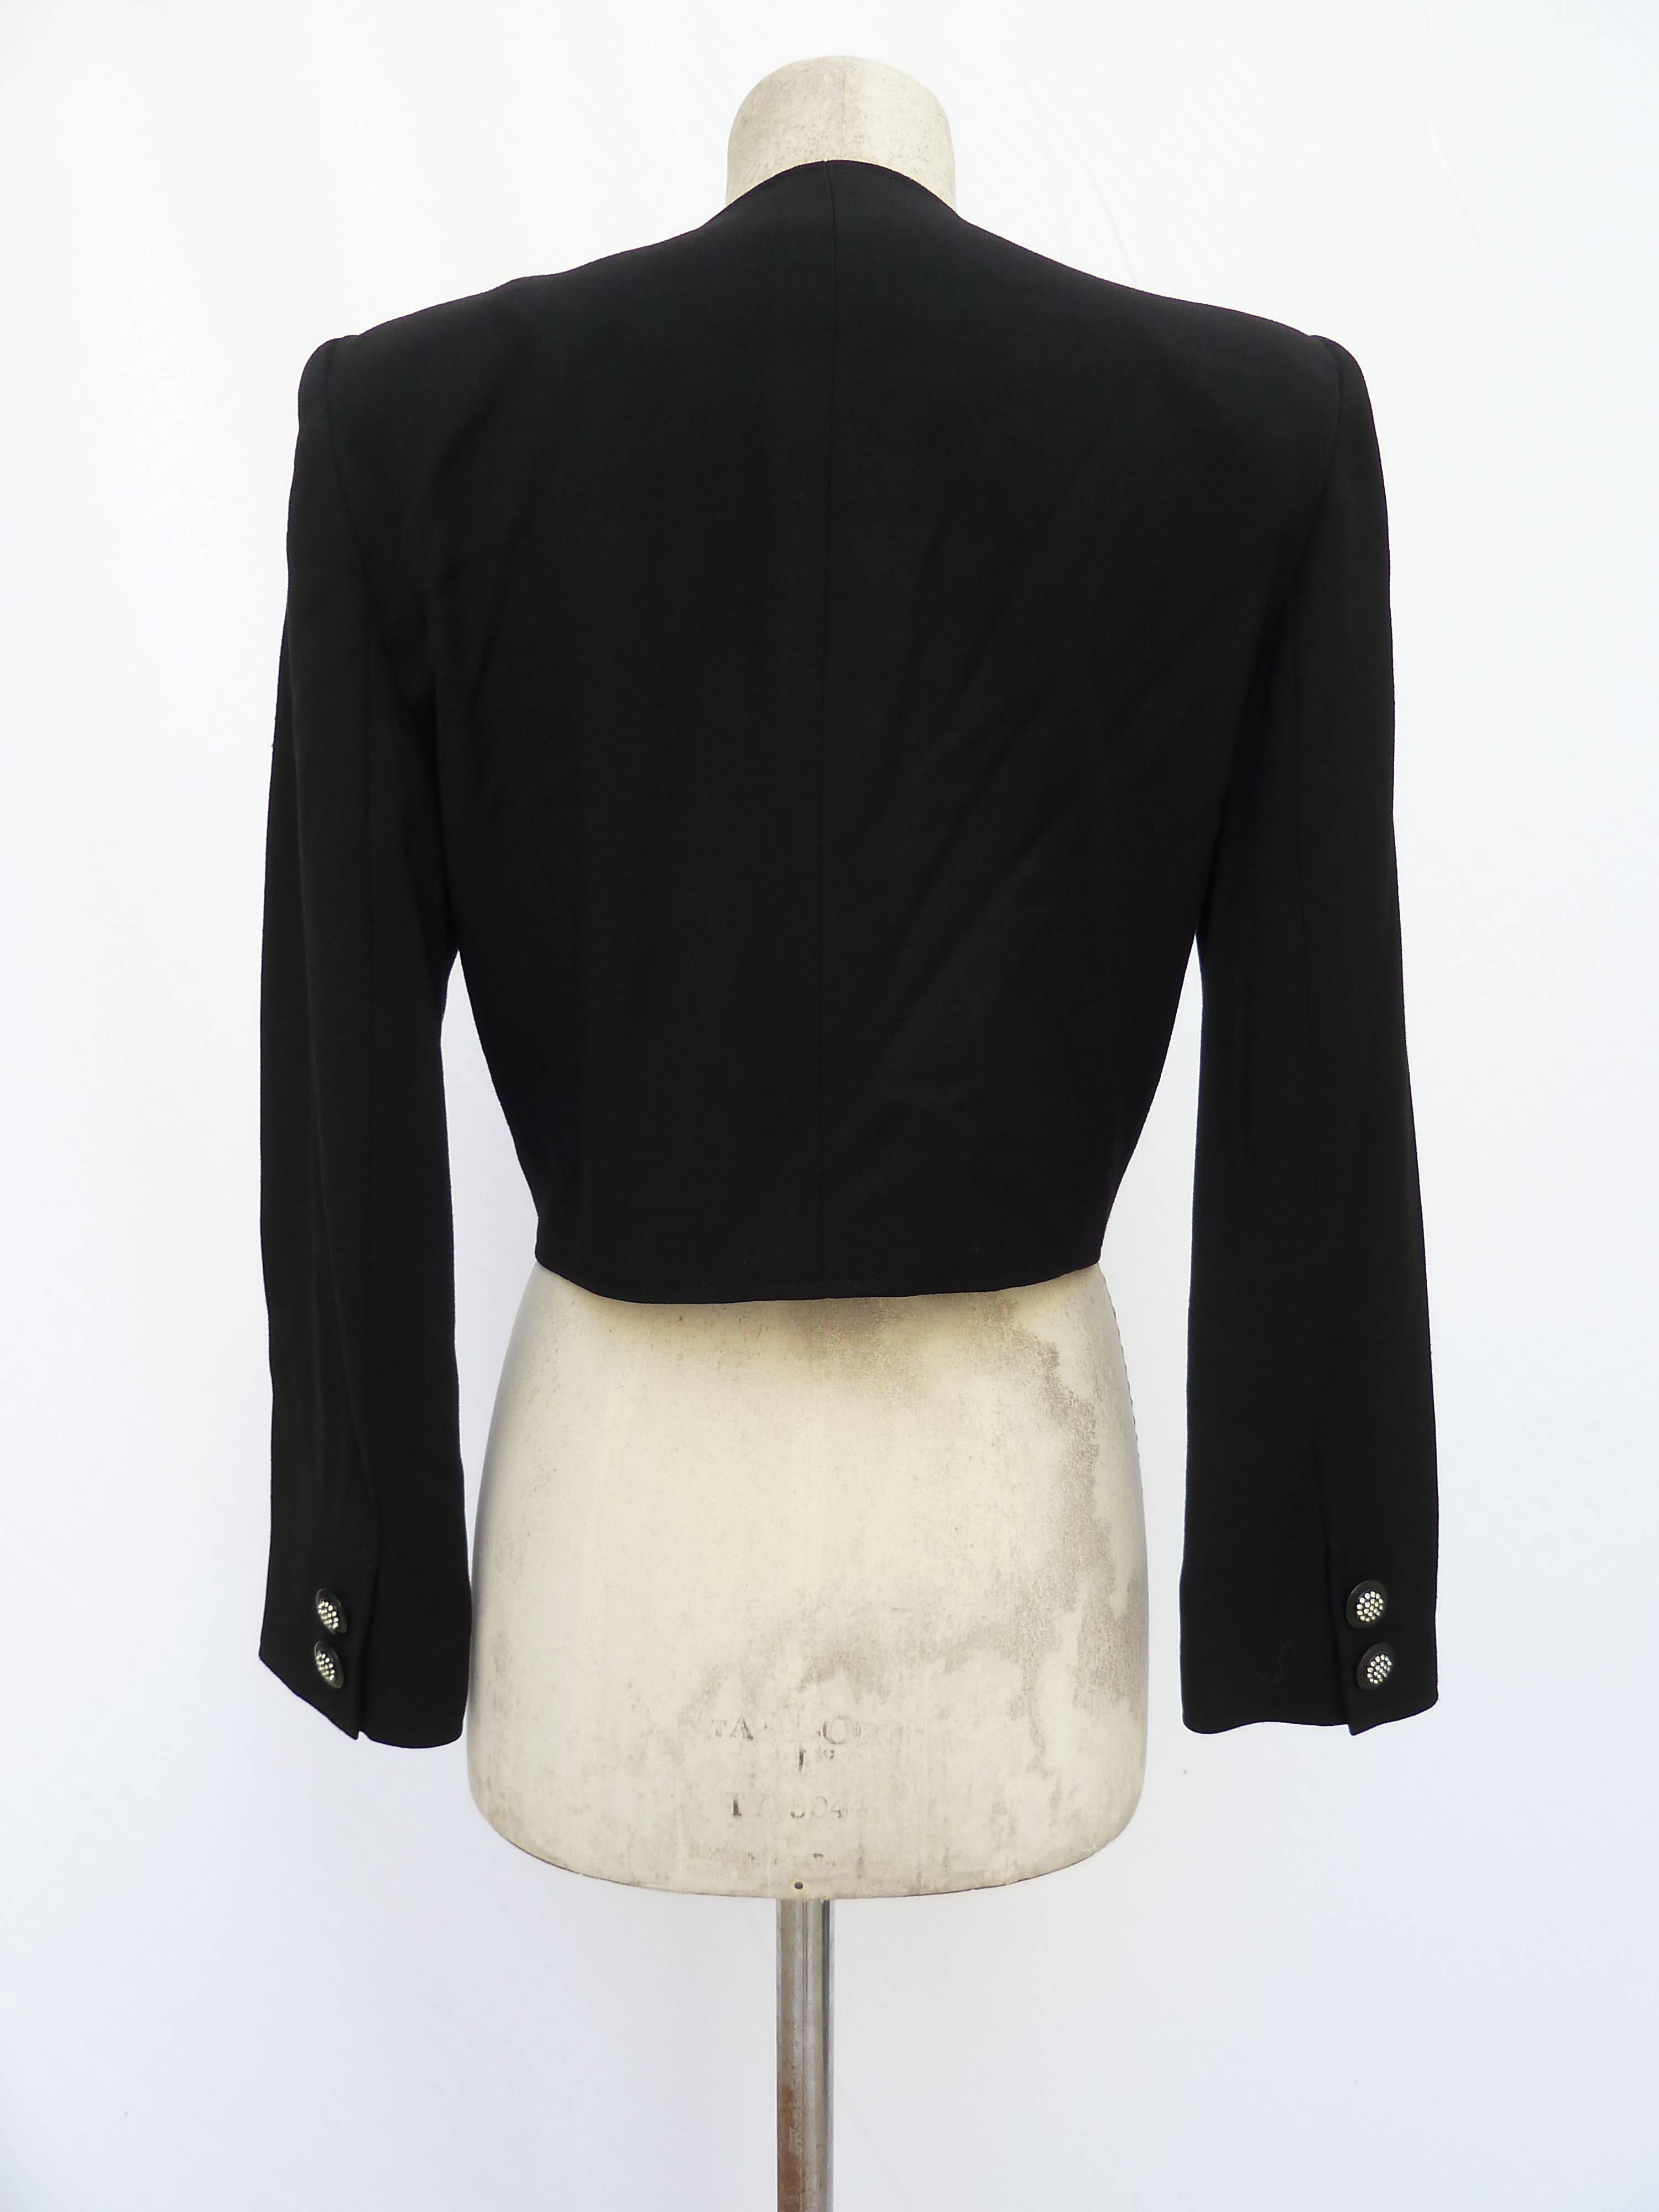 Valentino 1990 short jacket - 100% wool The jacket is buttoned with a clip on the waist. The buttons on the double breast are made of sparkling stones. One is placed on th interior as a spare. The collar is lined with velvet. Excellent vintage